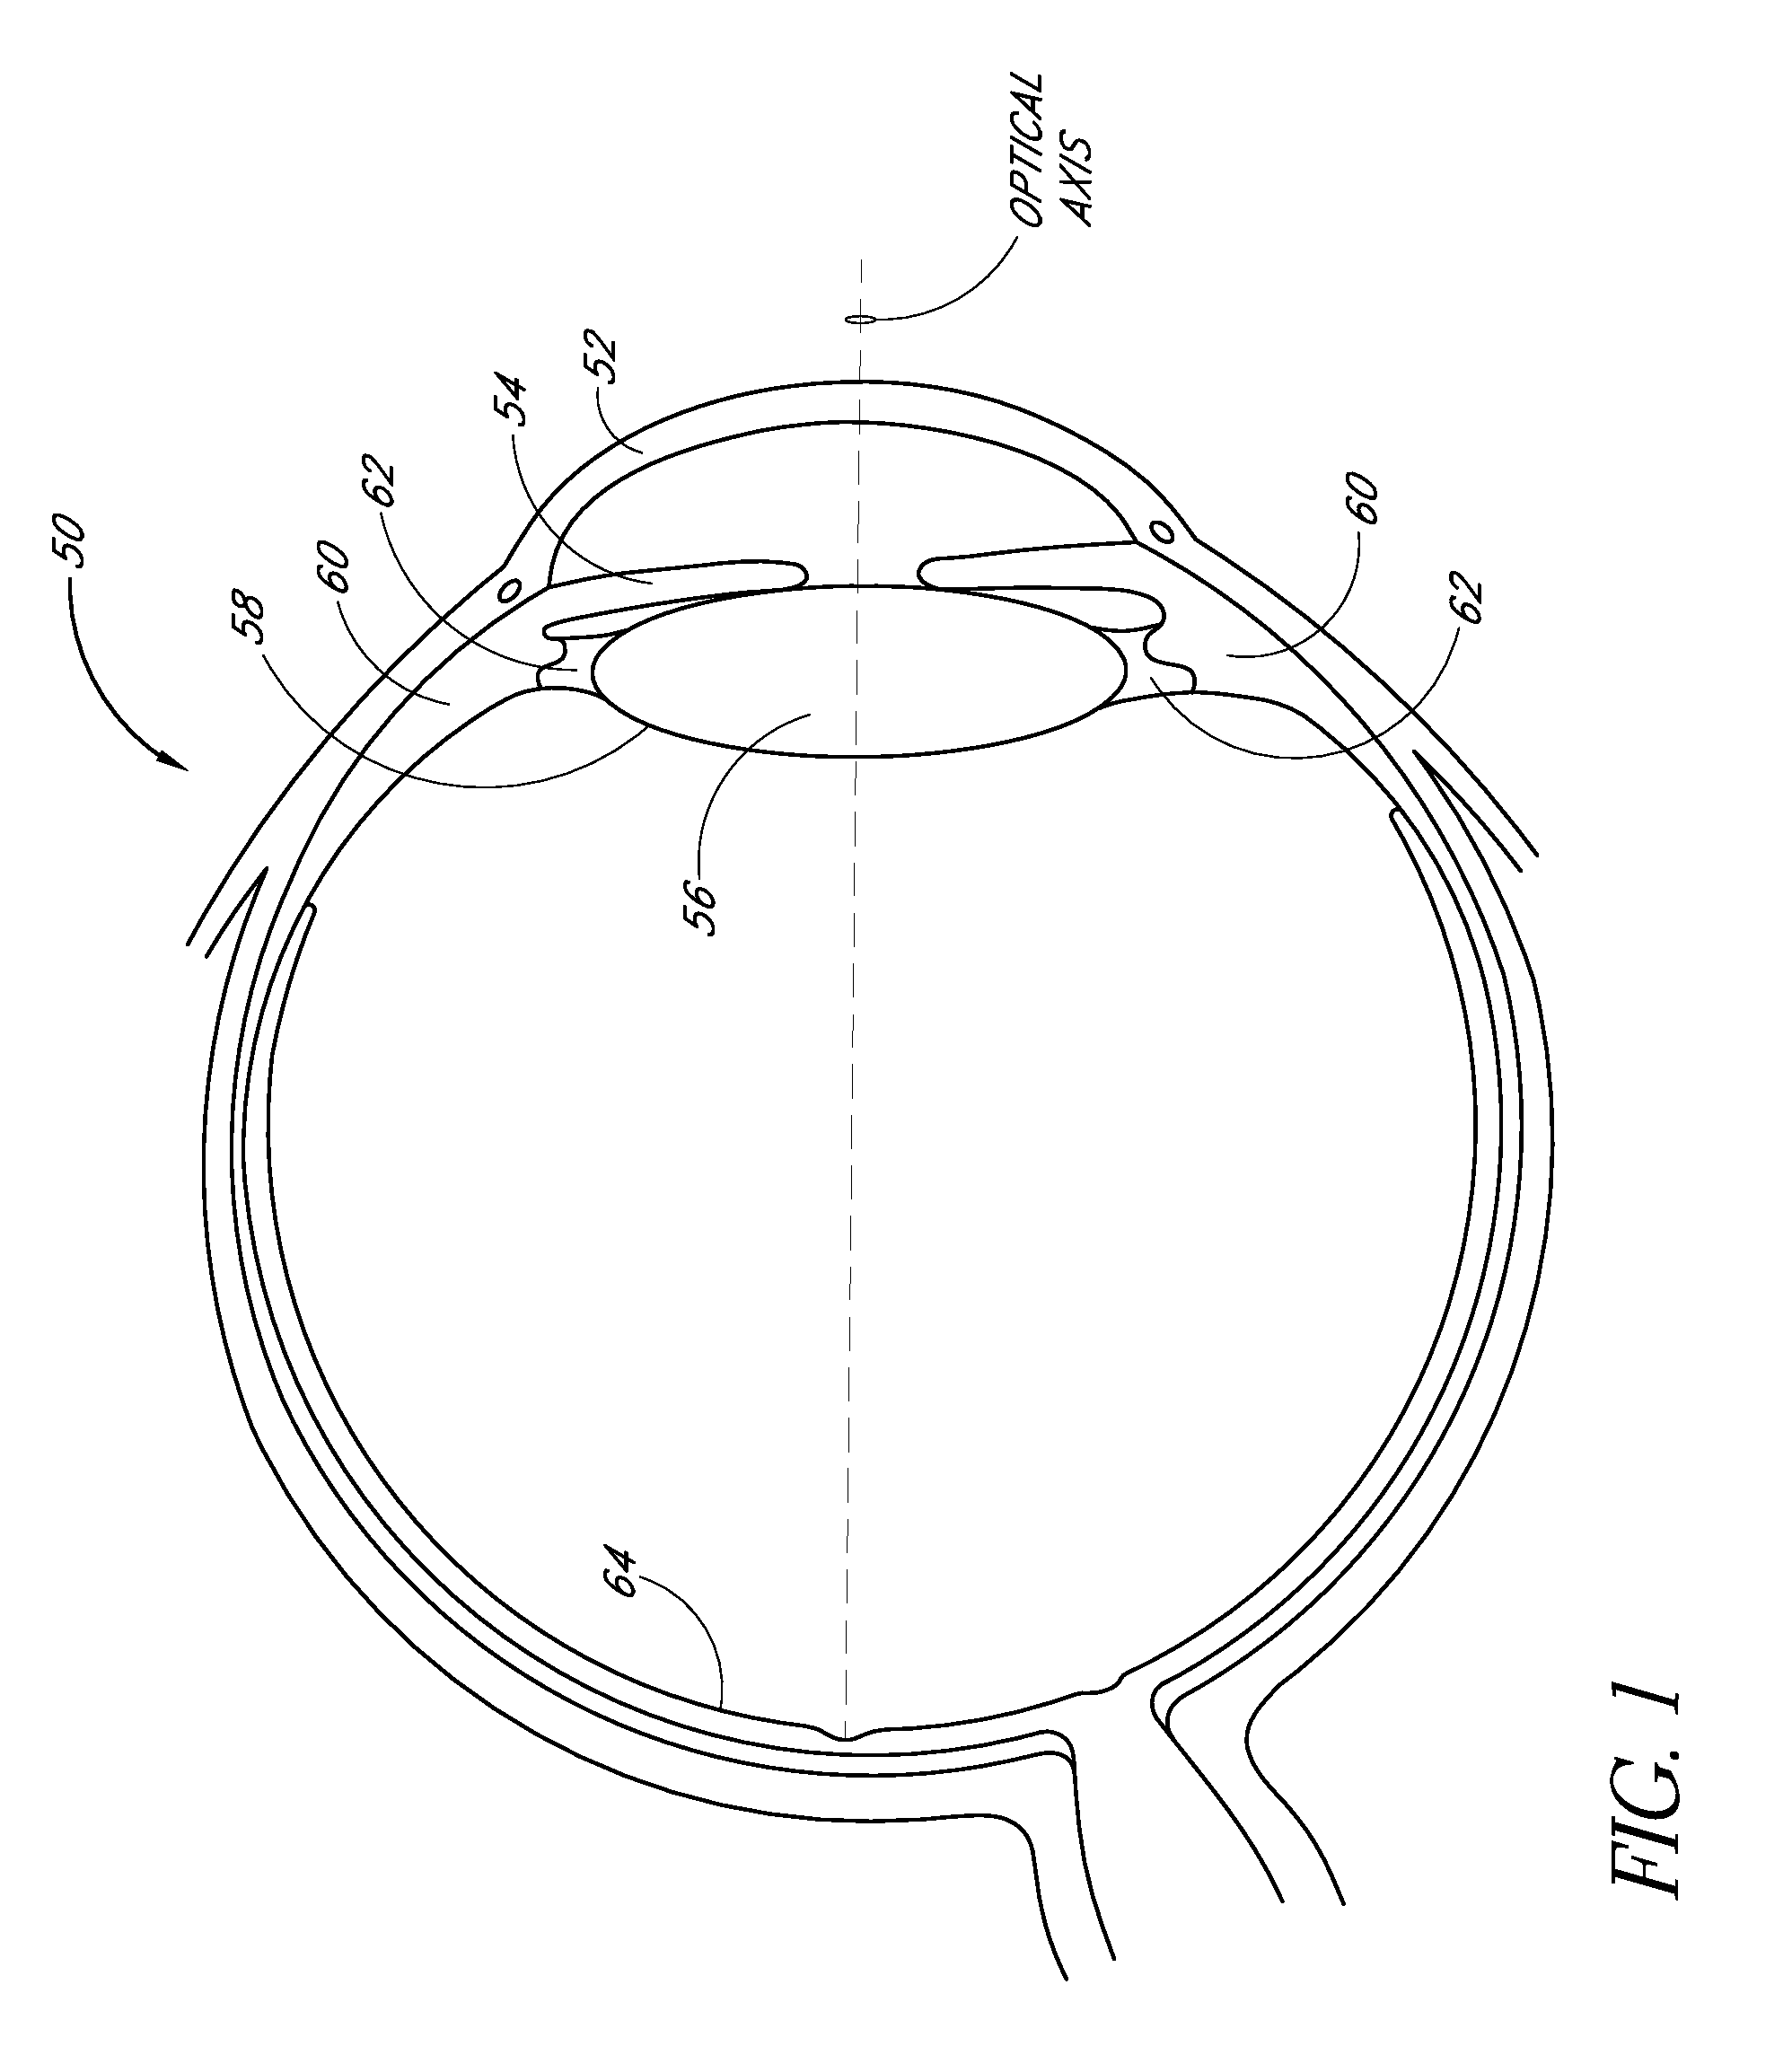 Intraocular lens with post-implantation adjustment capabilities